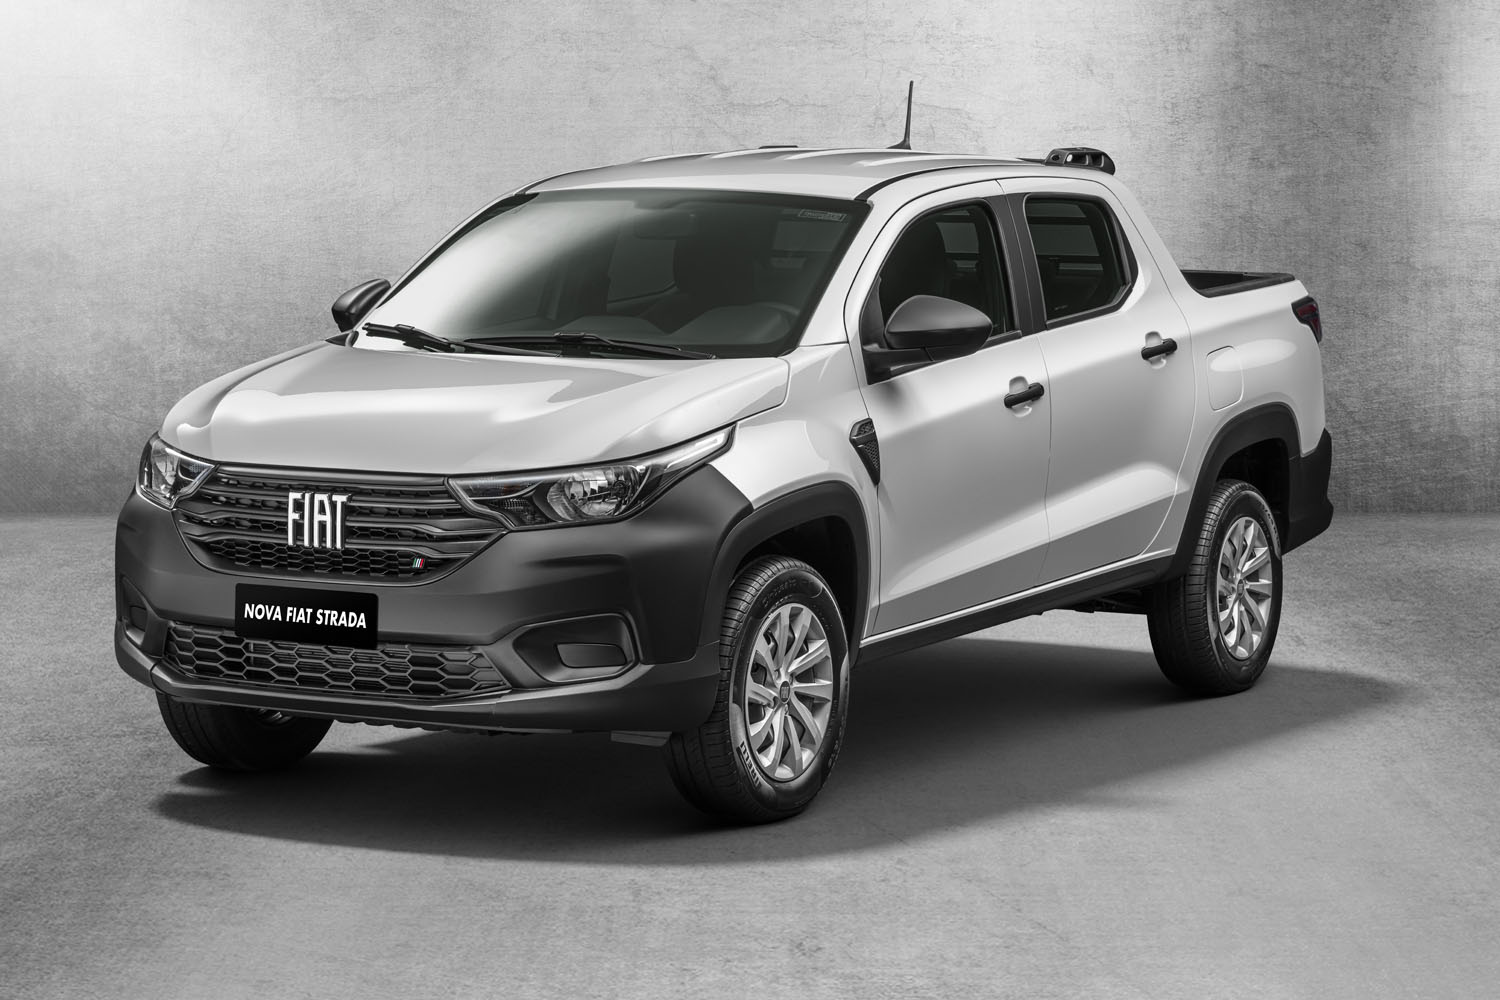 fiat, fiat strada, nissan, nissan np200, the fiat strada is coming back to africa – but we can’t have it